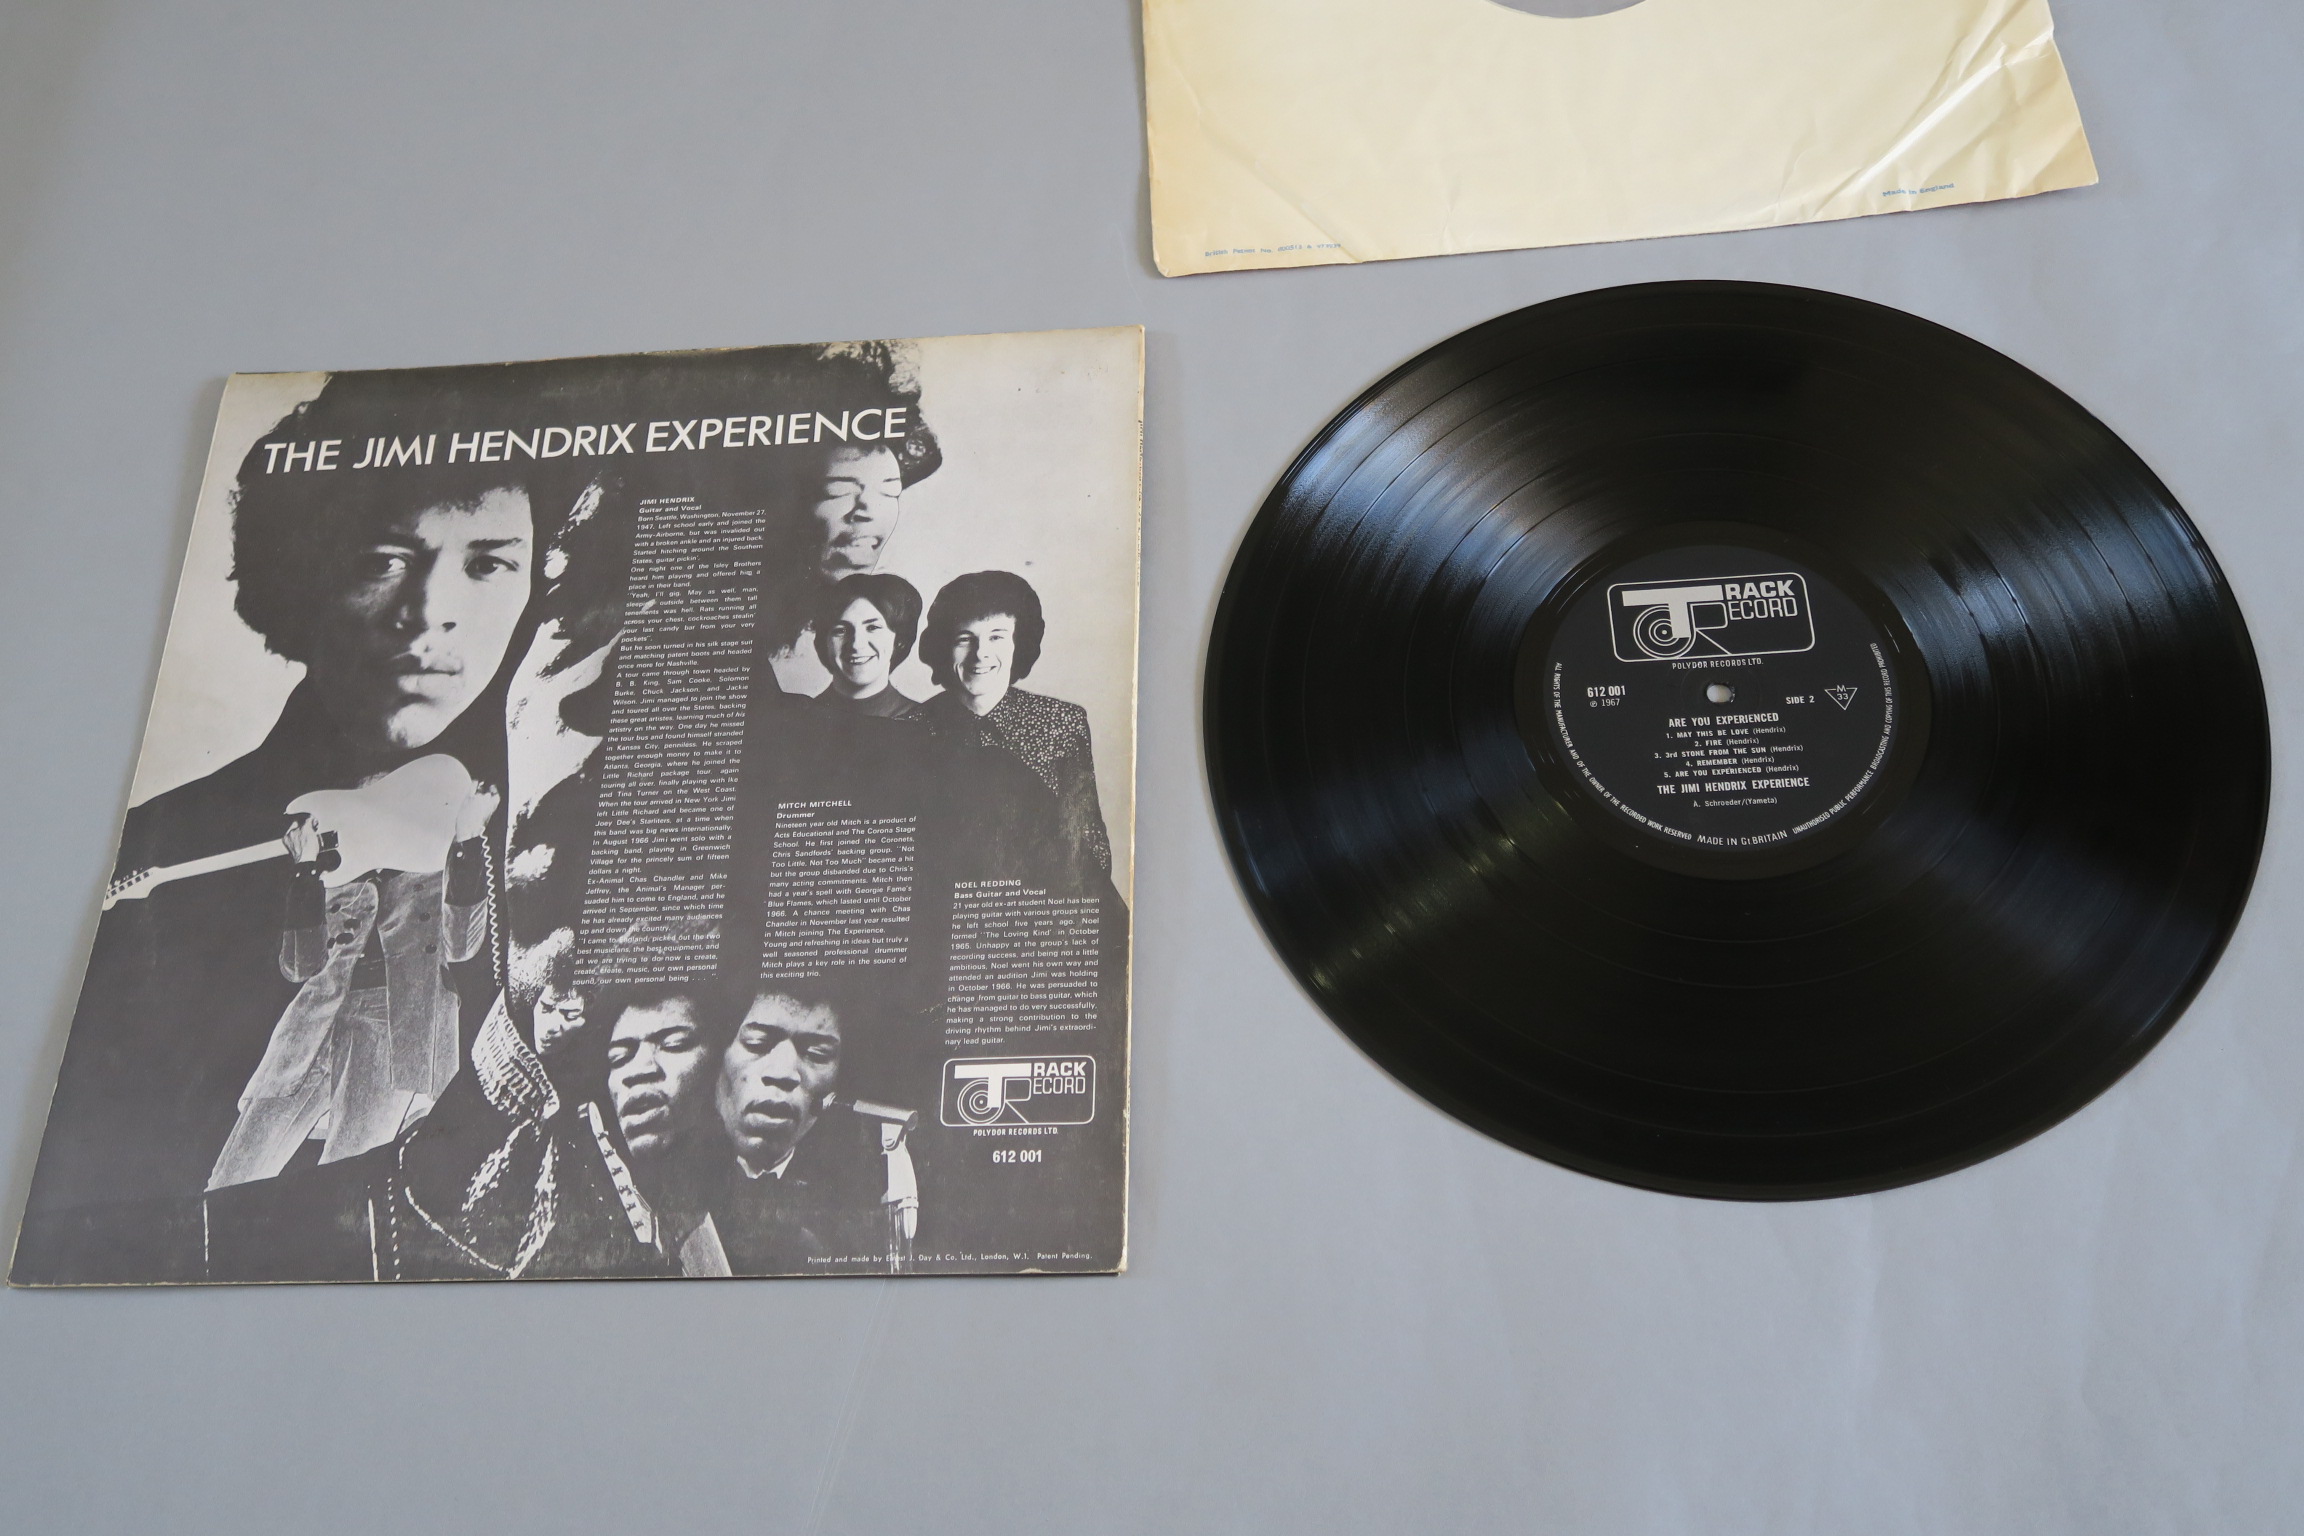 Jimi Hendrix Are you Experienced very first LP vinyl record from 1967 catalogue number Track 612 001 - Image 3 of 4